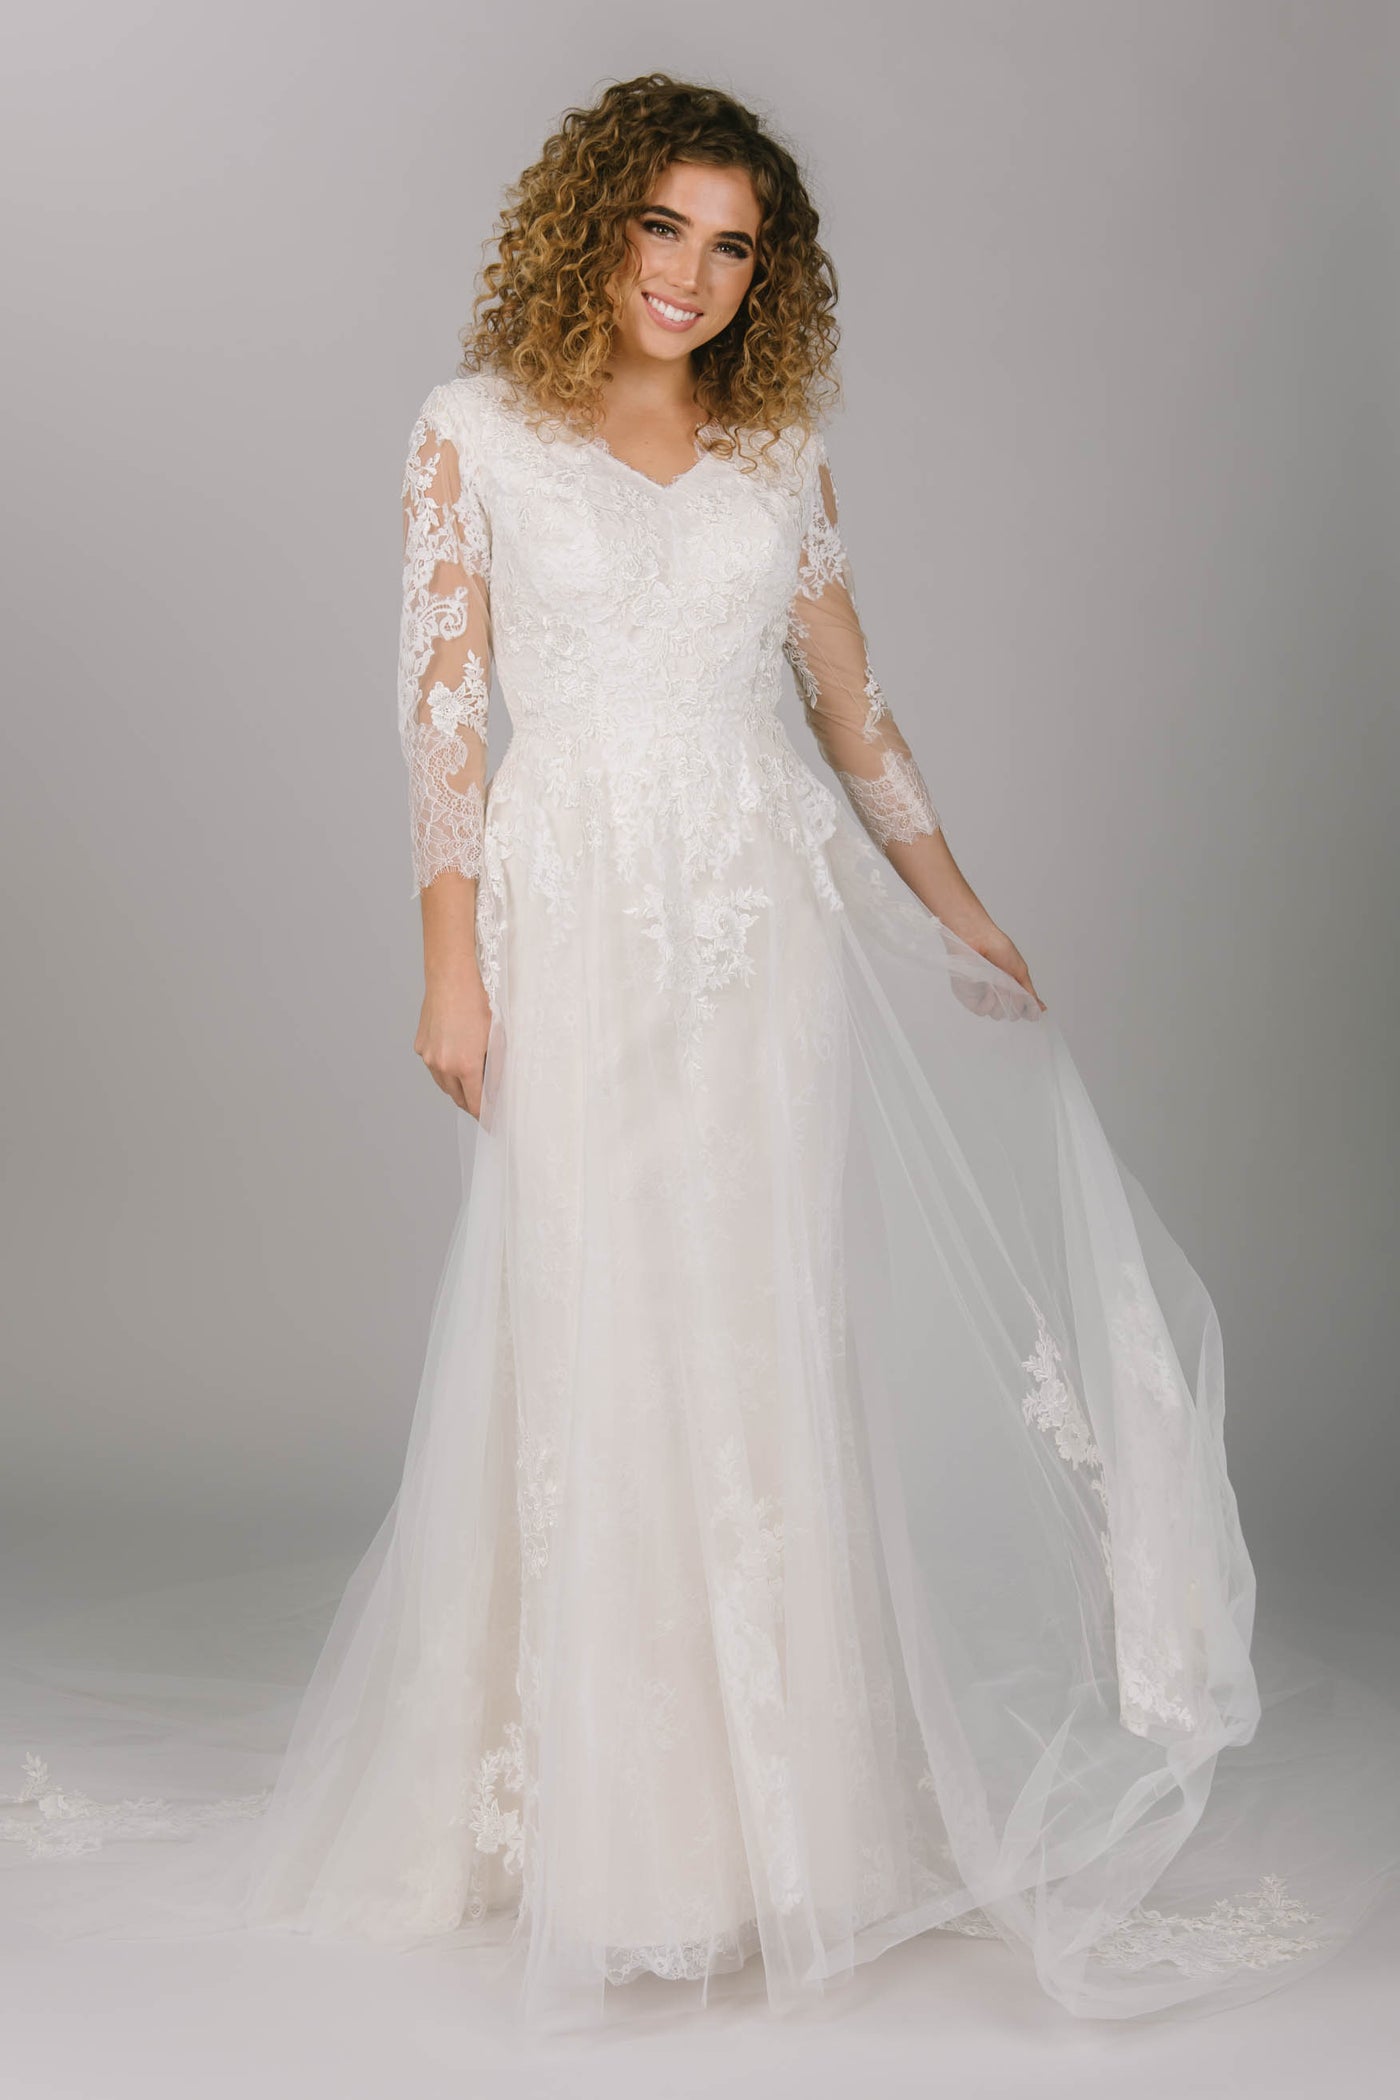 Front view of modest wedding dress with long sleeves. It has a v-neckline and long tulle train. The lace is soft and delicate and is found through the dress. This is a dreamy modest wedding gown.